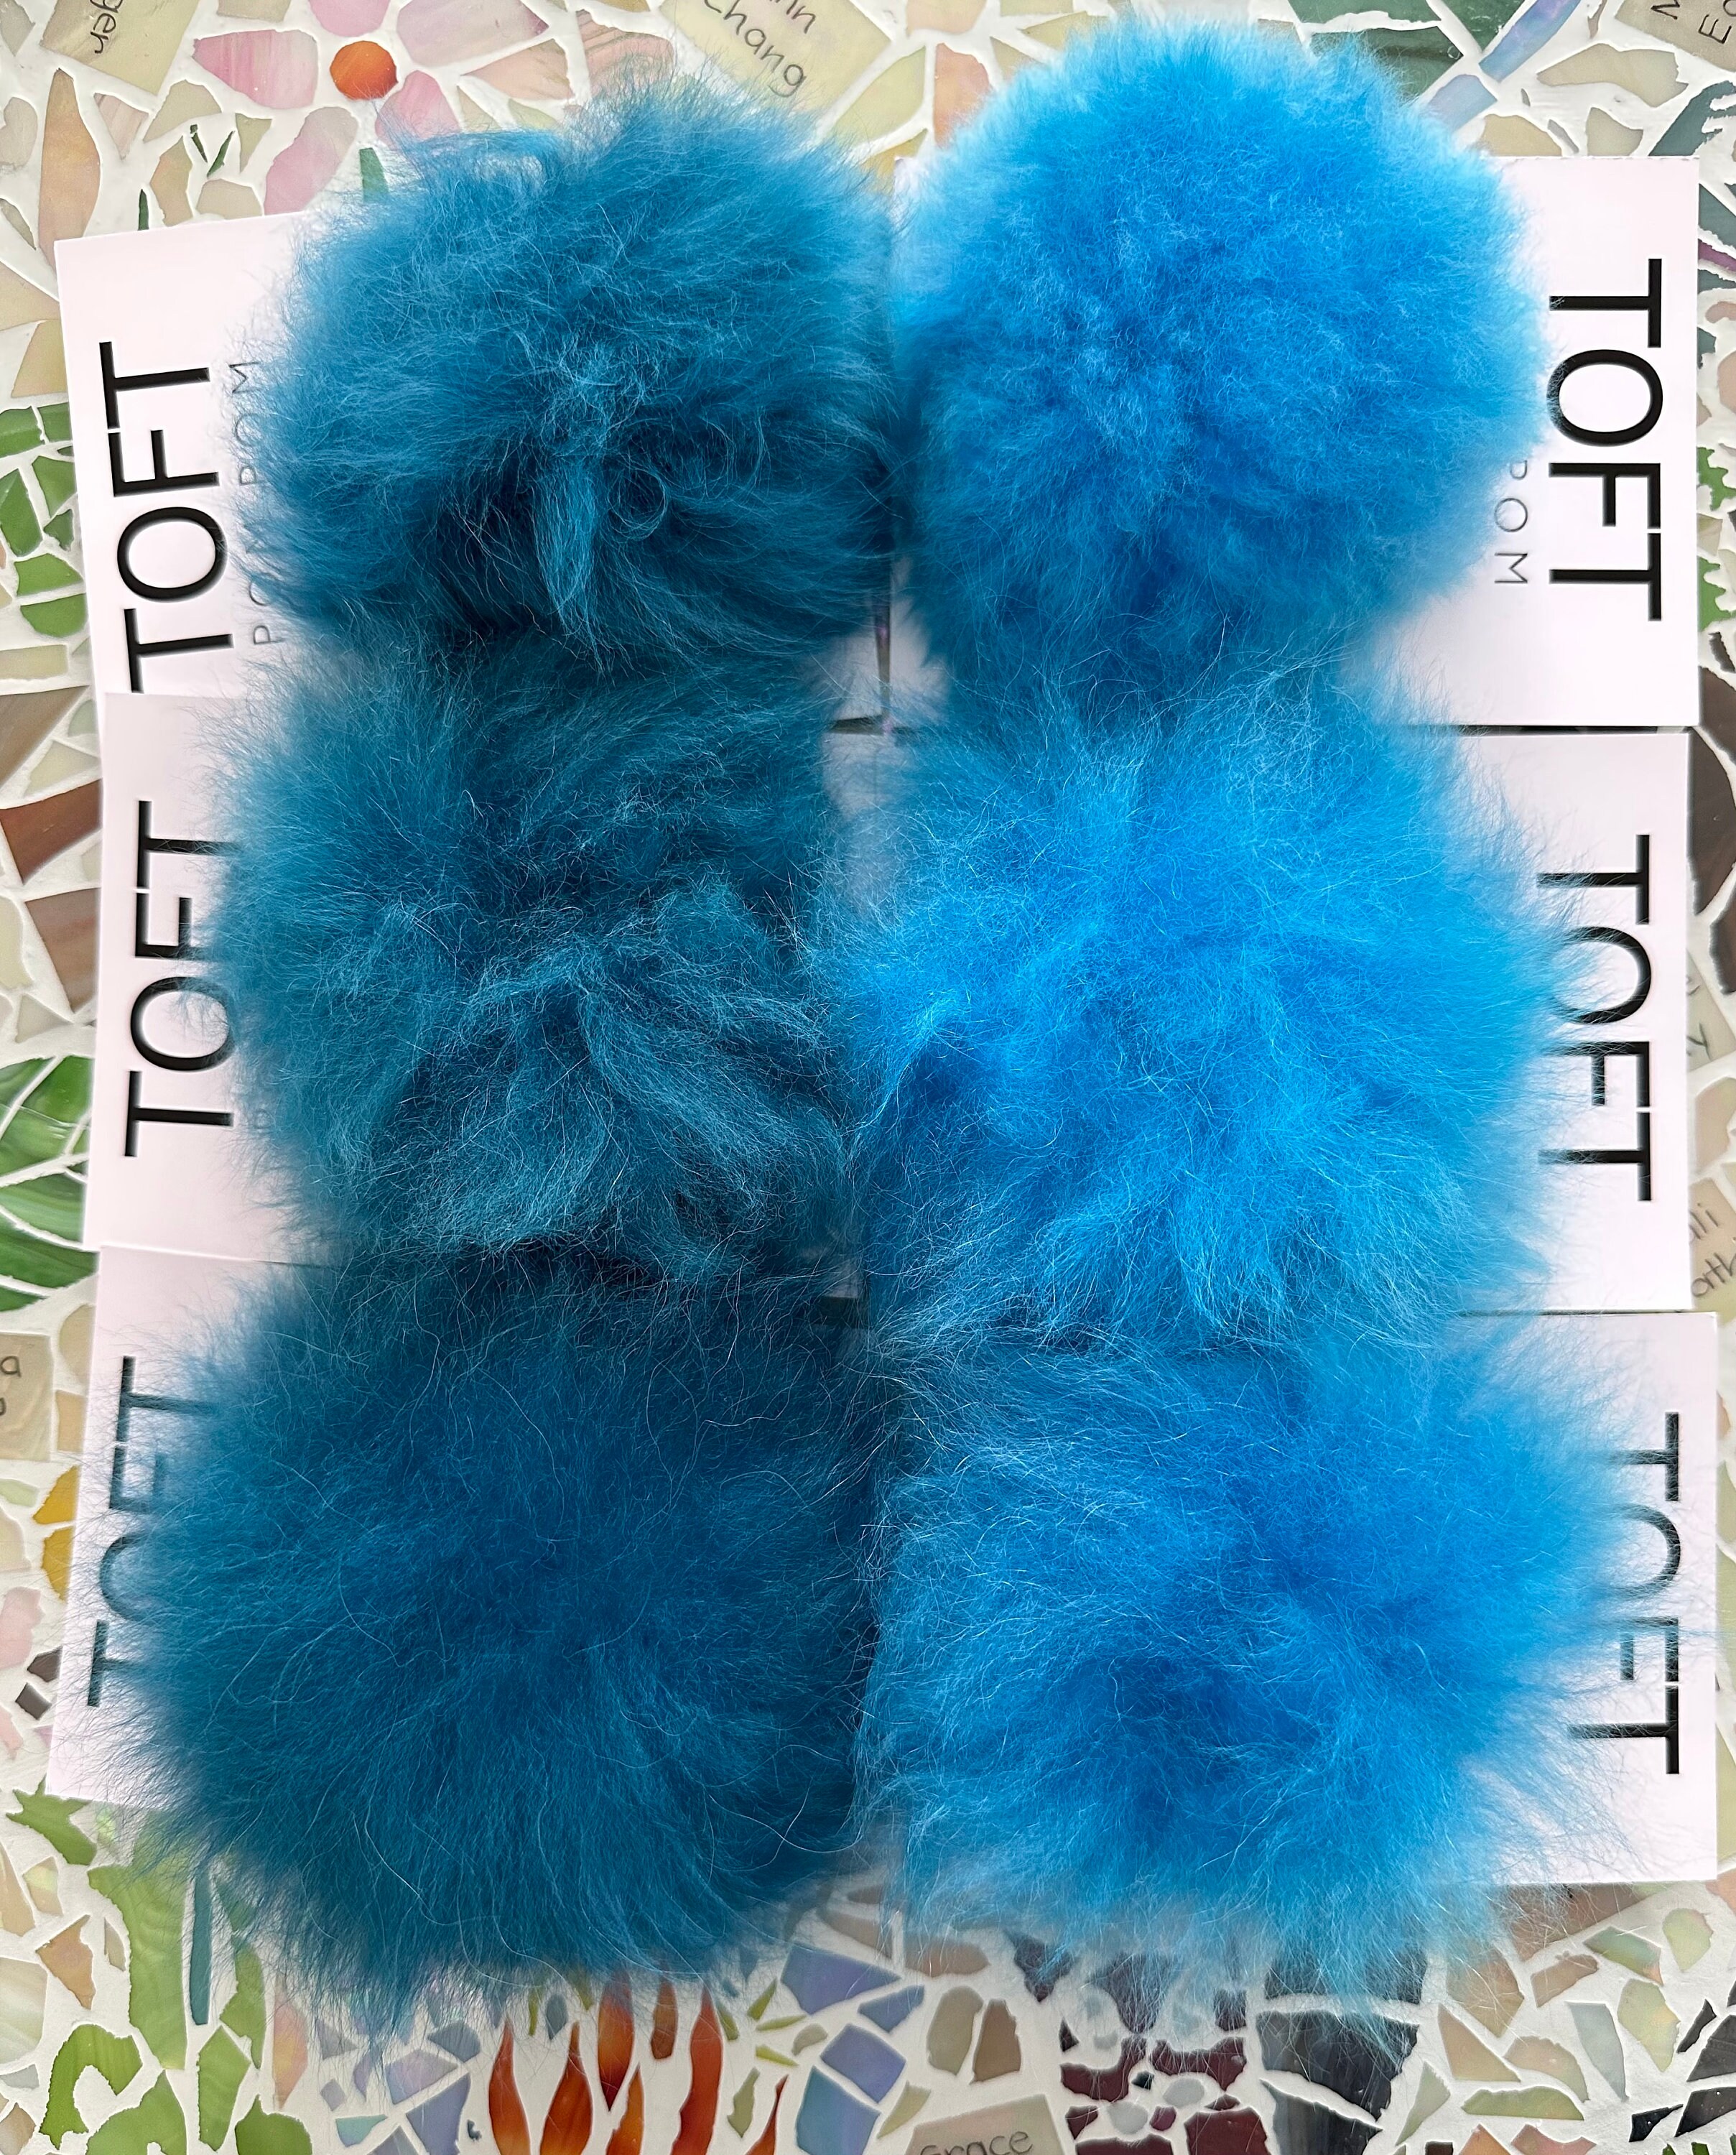 Choose a Colorful Toft Pom Pom made from Alpaca Fur which has a snap to sew  on to your knitwear. Snap on and off for washing or to change the look  of